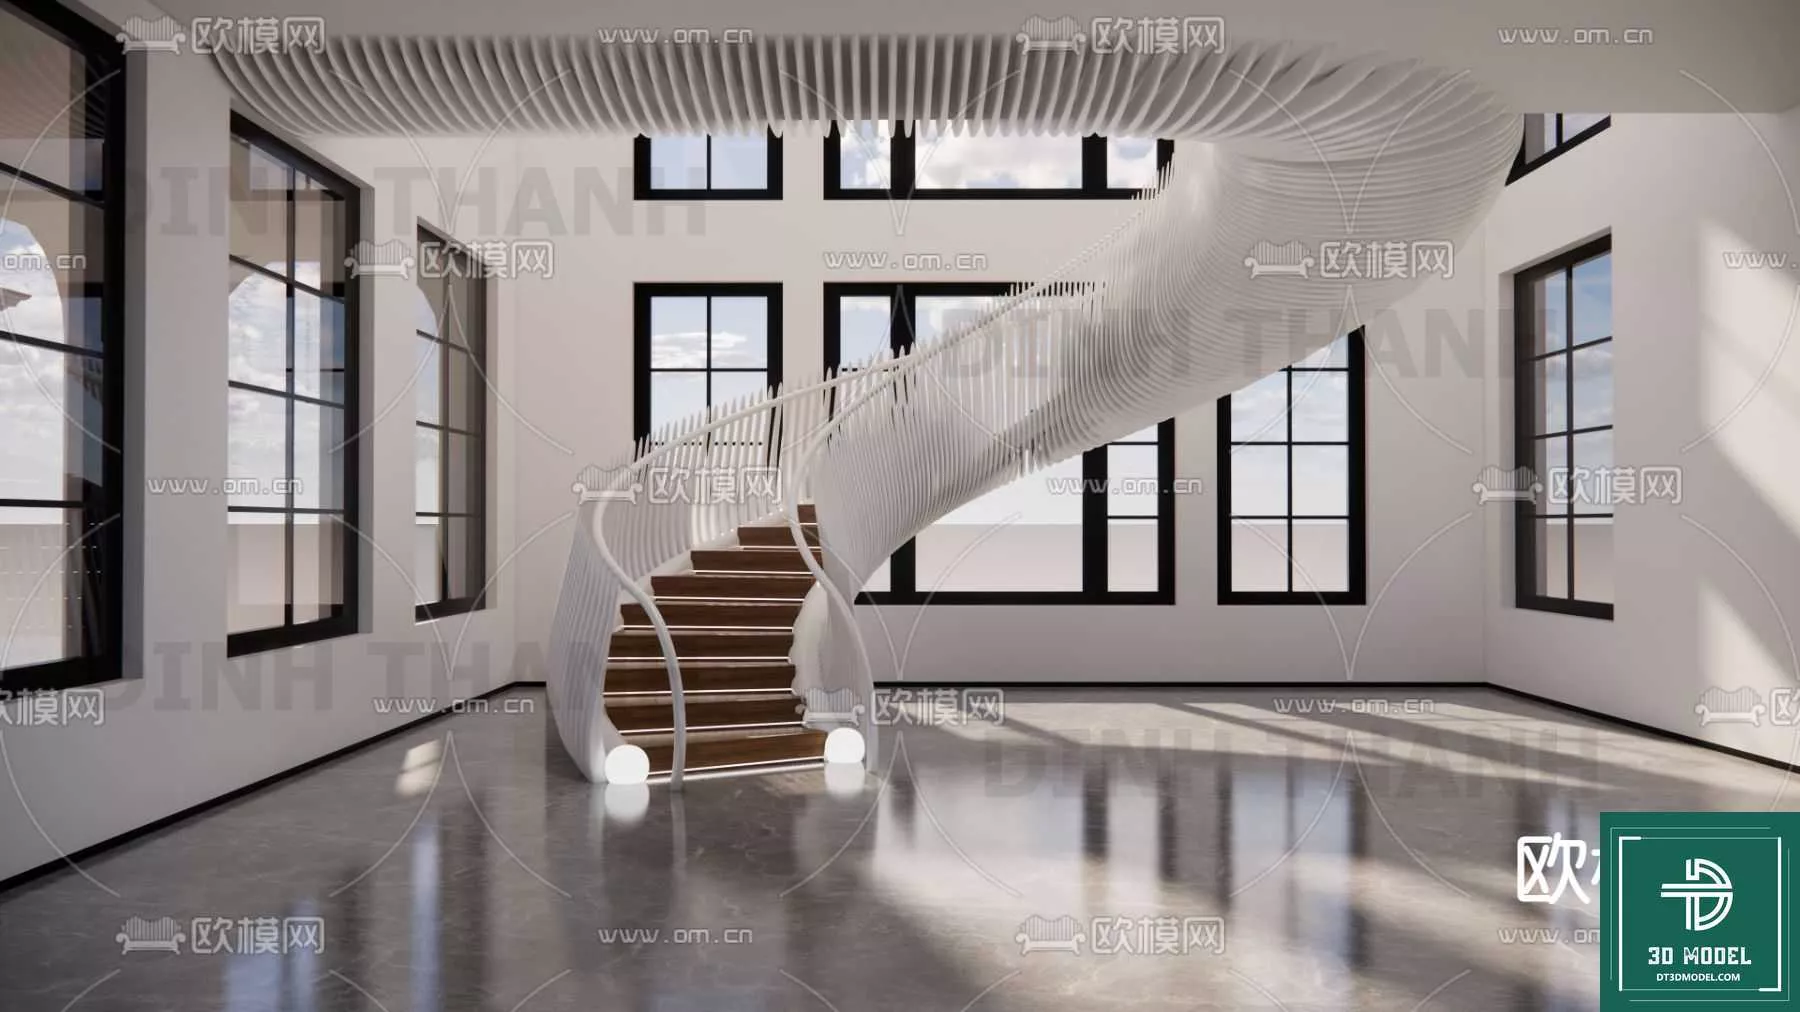 MODERN STAIR - SKETCHUP 3D MODEL - VRAY OR ENSCAPE - ID14261